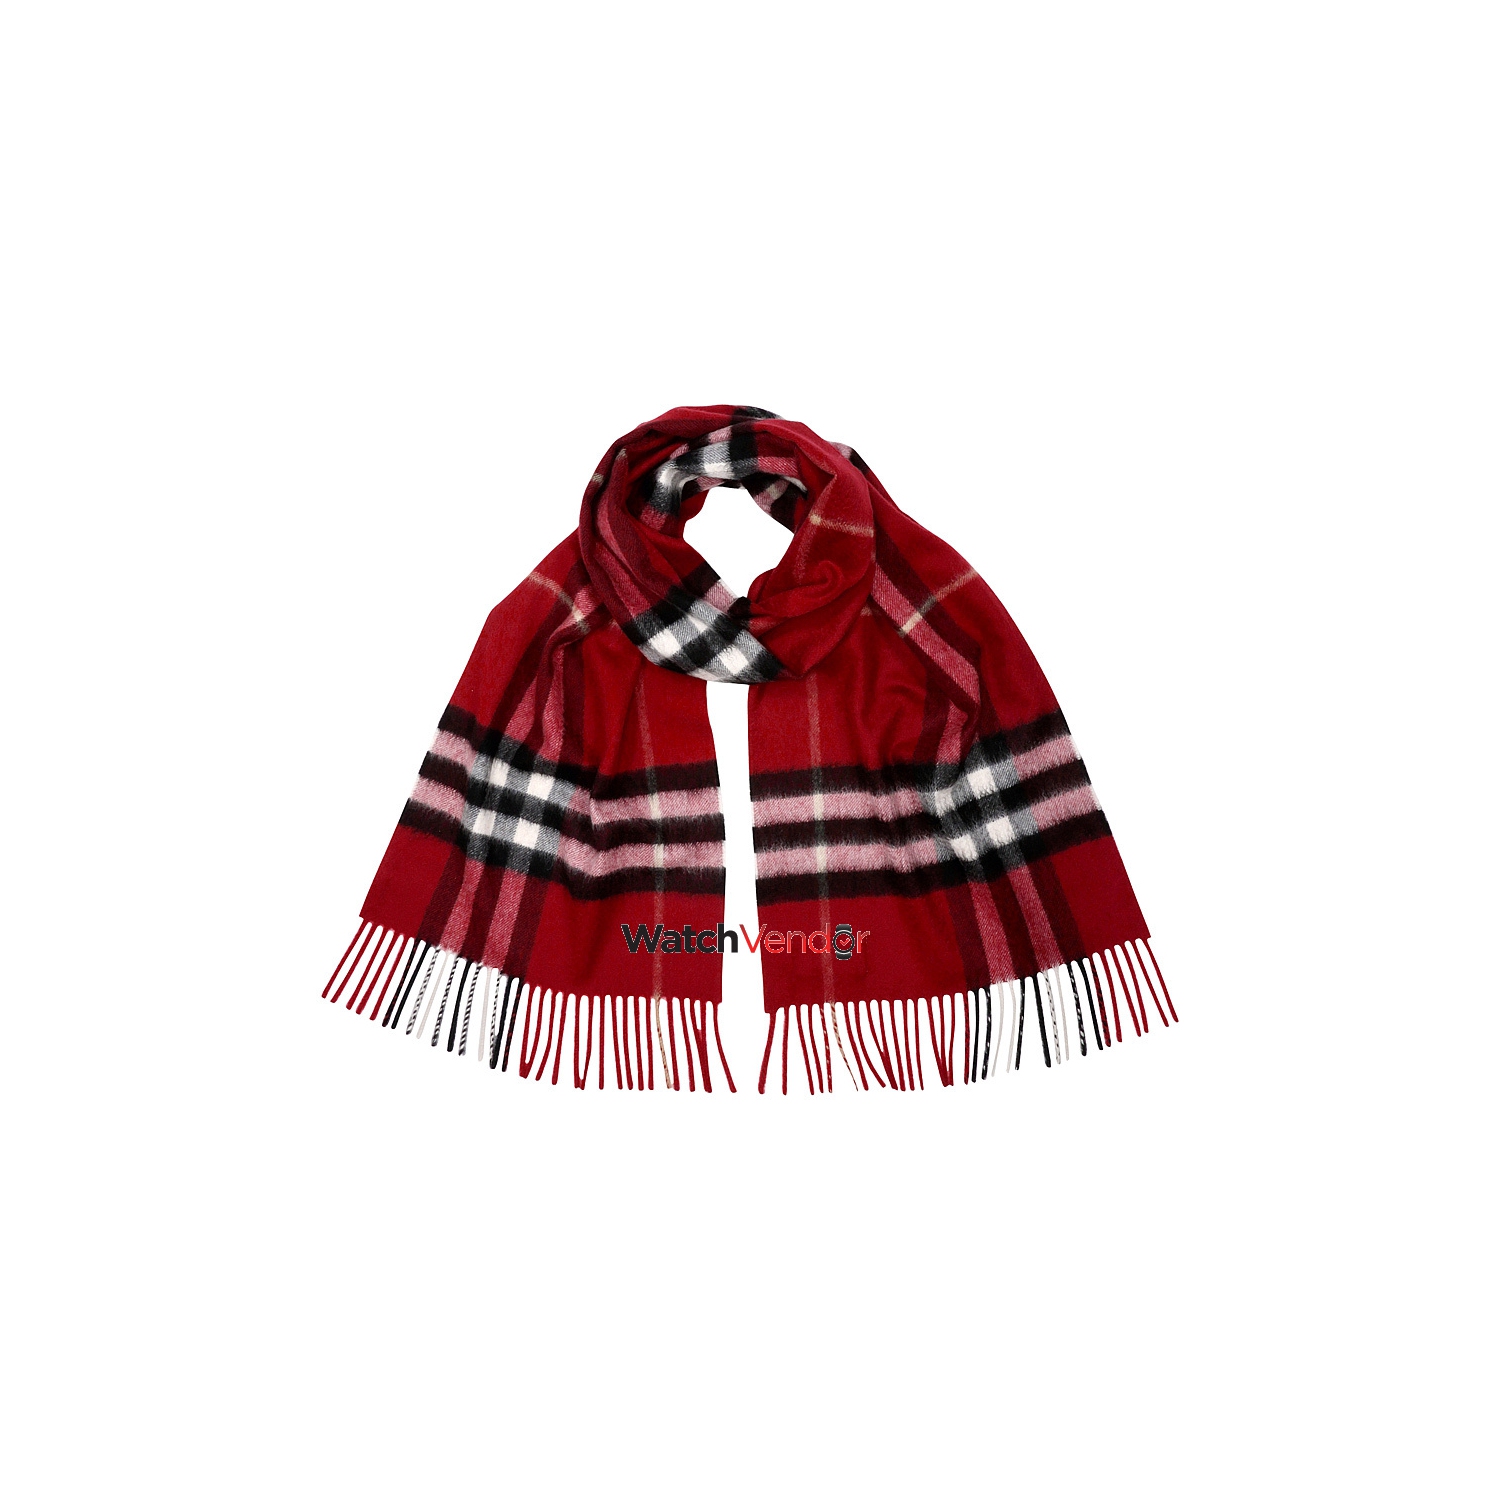 Burberry Classic Cashmere Scarf in Check - Parade Red